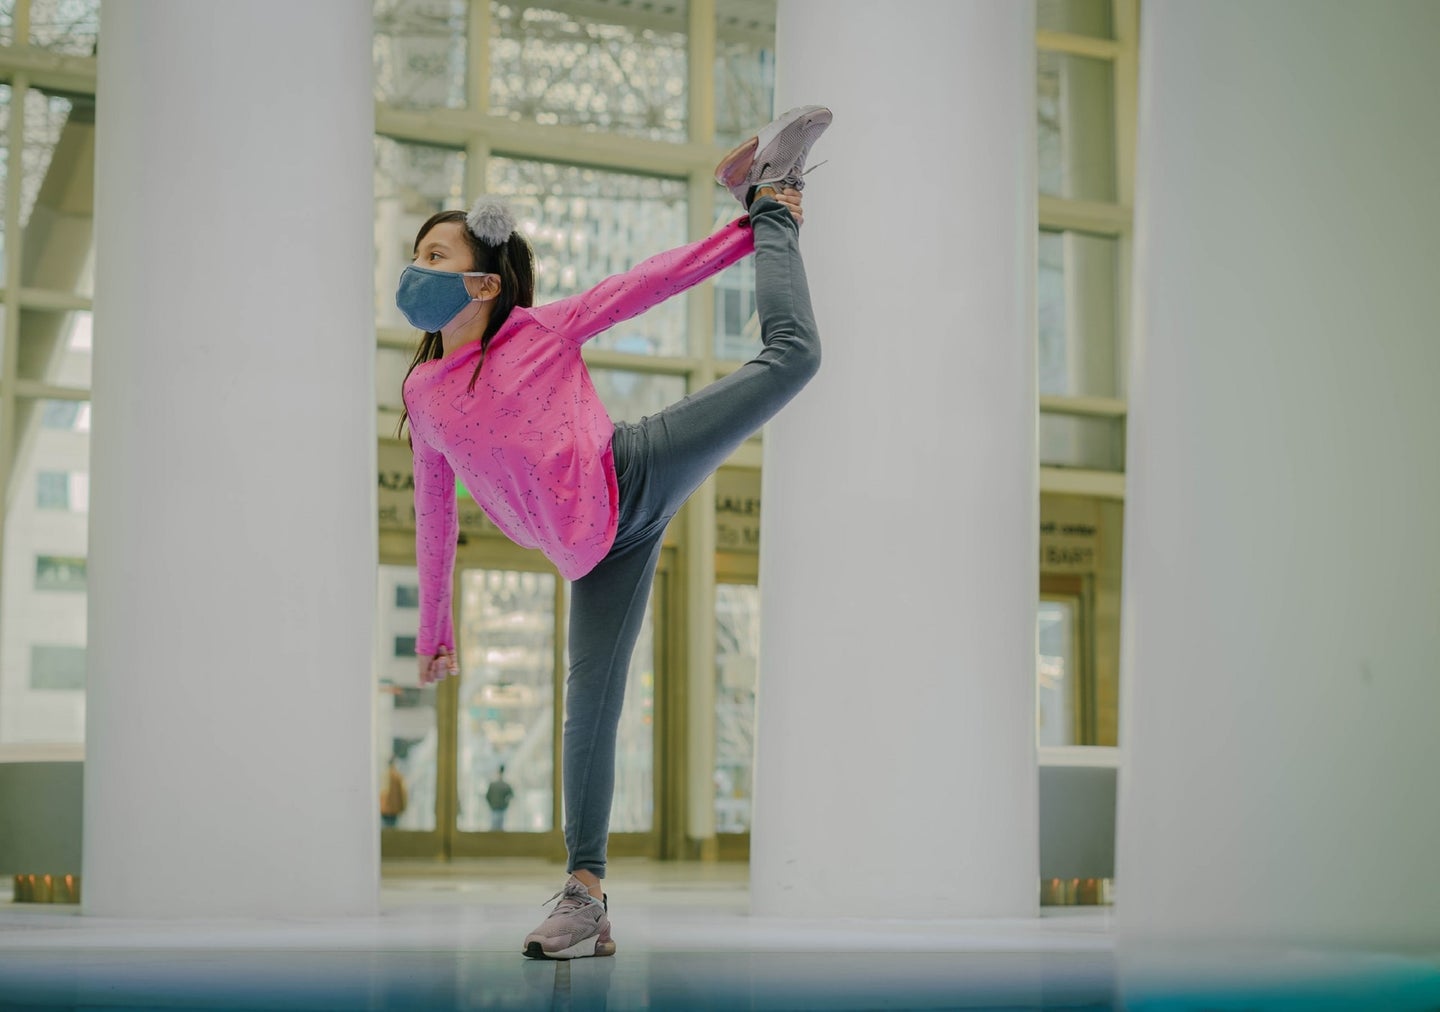 Child in a pink shirt and hair bow wearing a mask and holding a dance pose inside an atrium